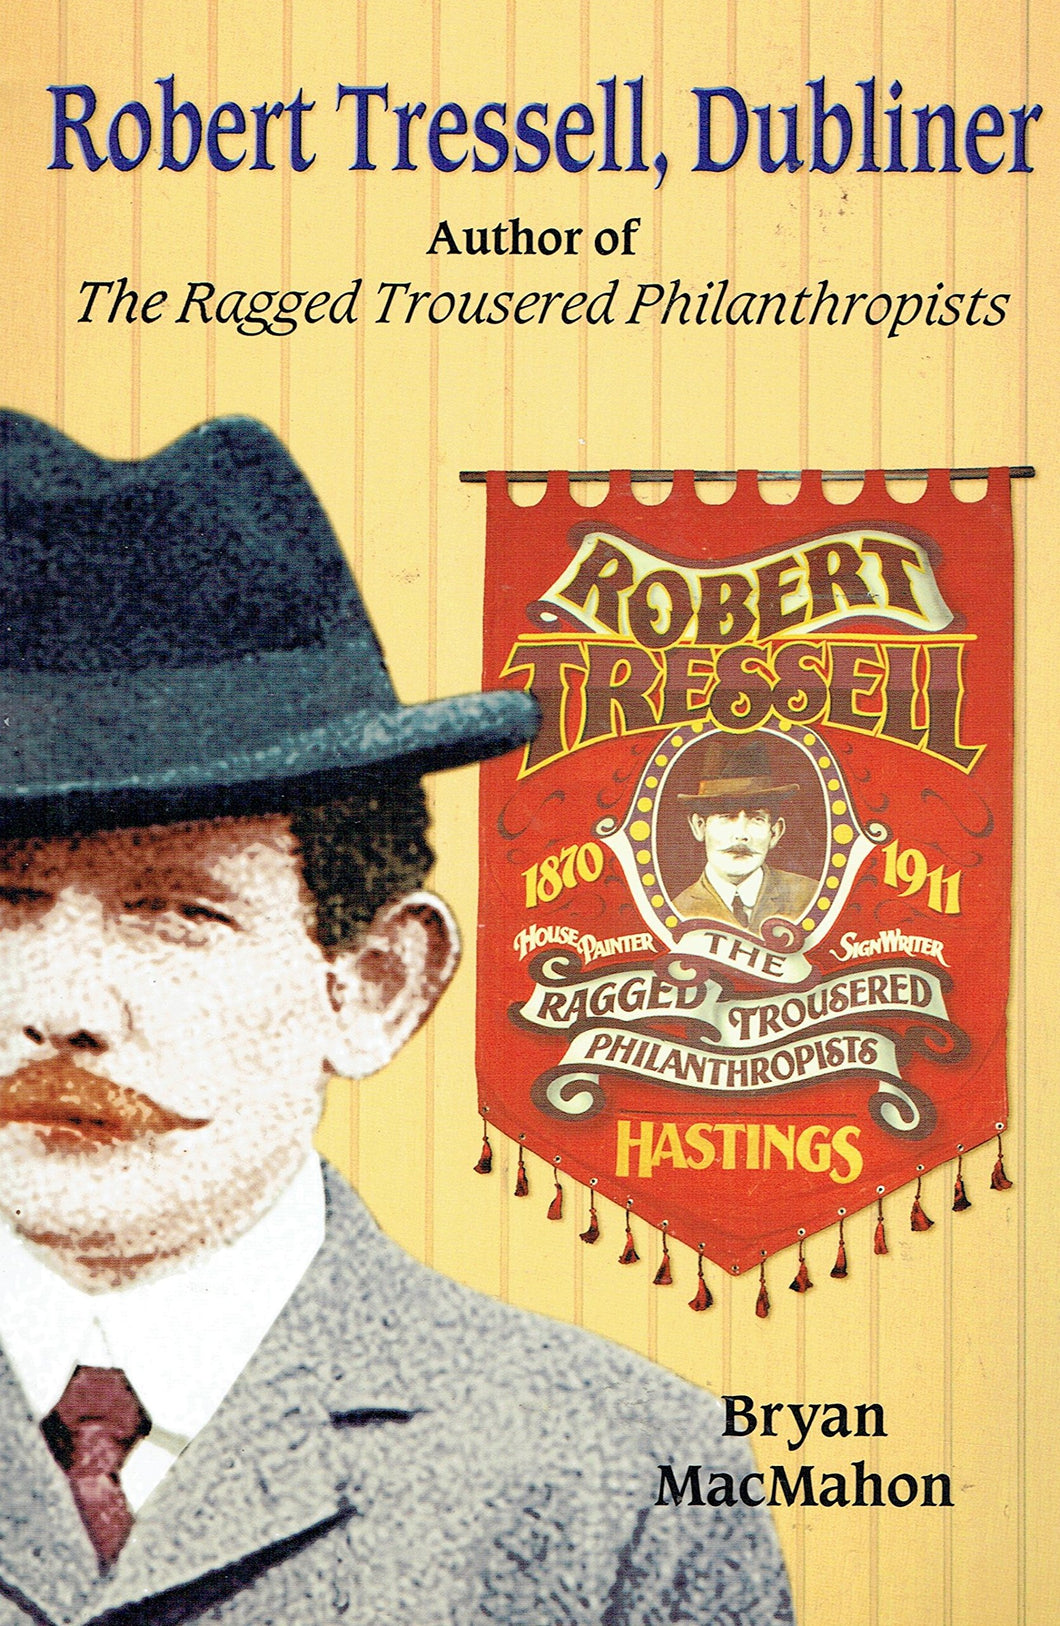 Robert Tressell, Dubliner - Author of The Ragged Trousered Philanthropists